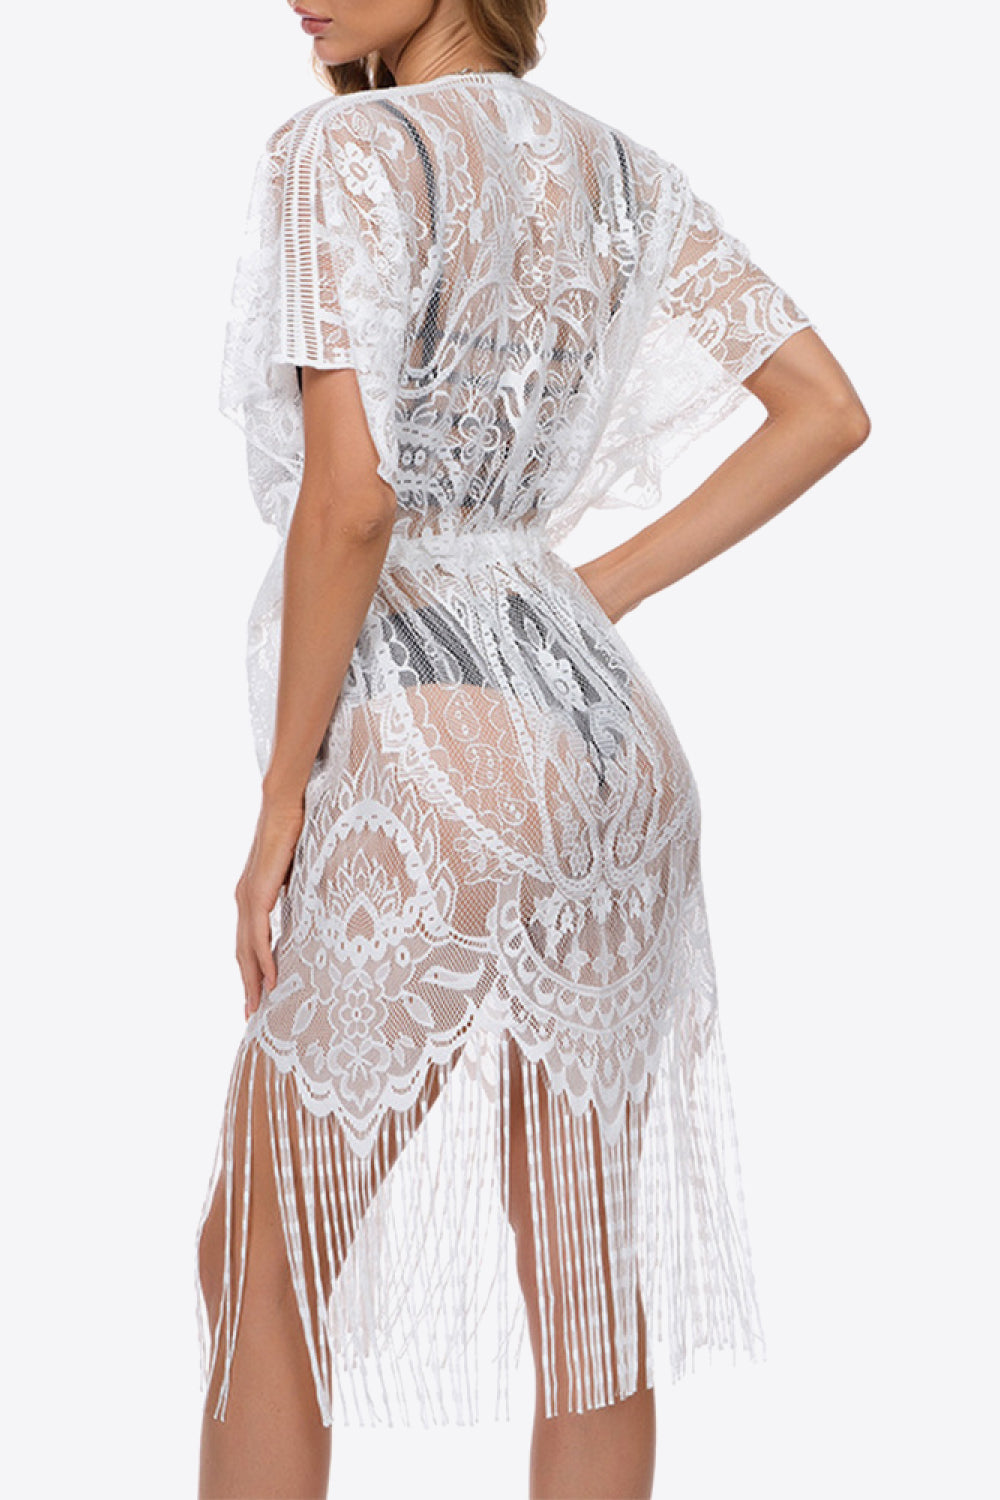 Forever Beautiful Lace Cover-Up Dress